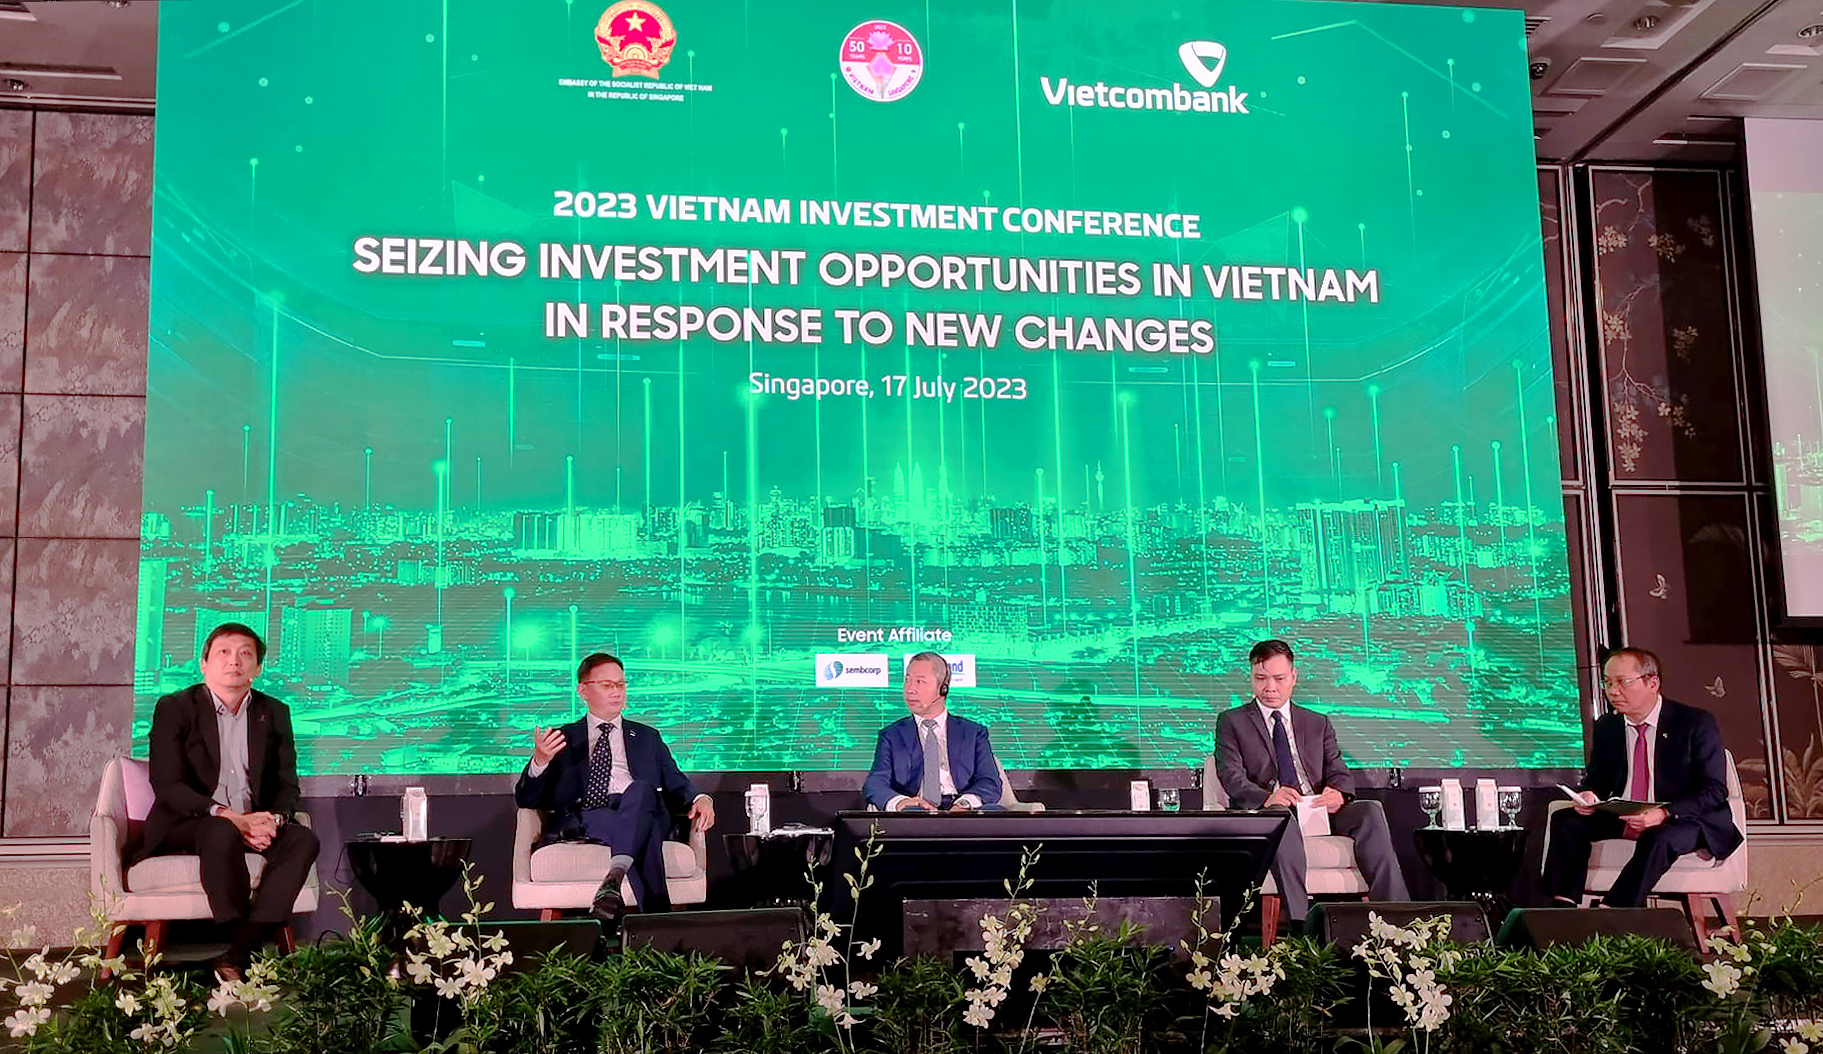 Mr-Joseph-Low-President-Vietnam-of-Keppel-Real-Estate-Division-at-the-panel-discussion.jpg